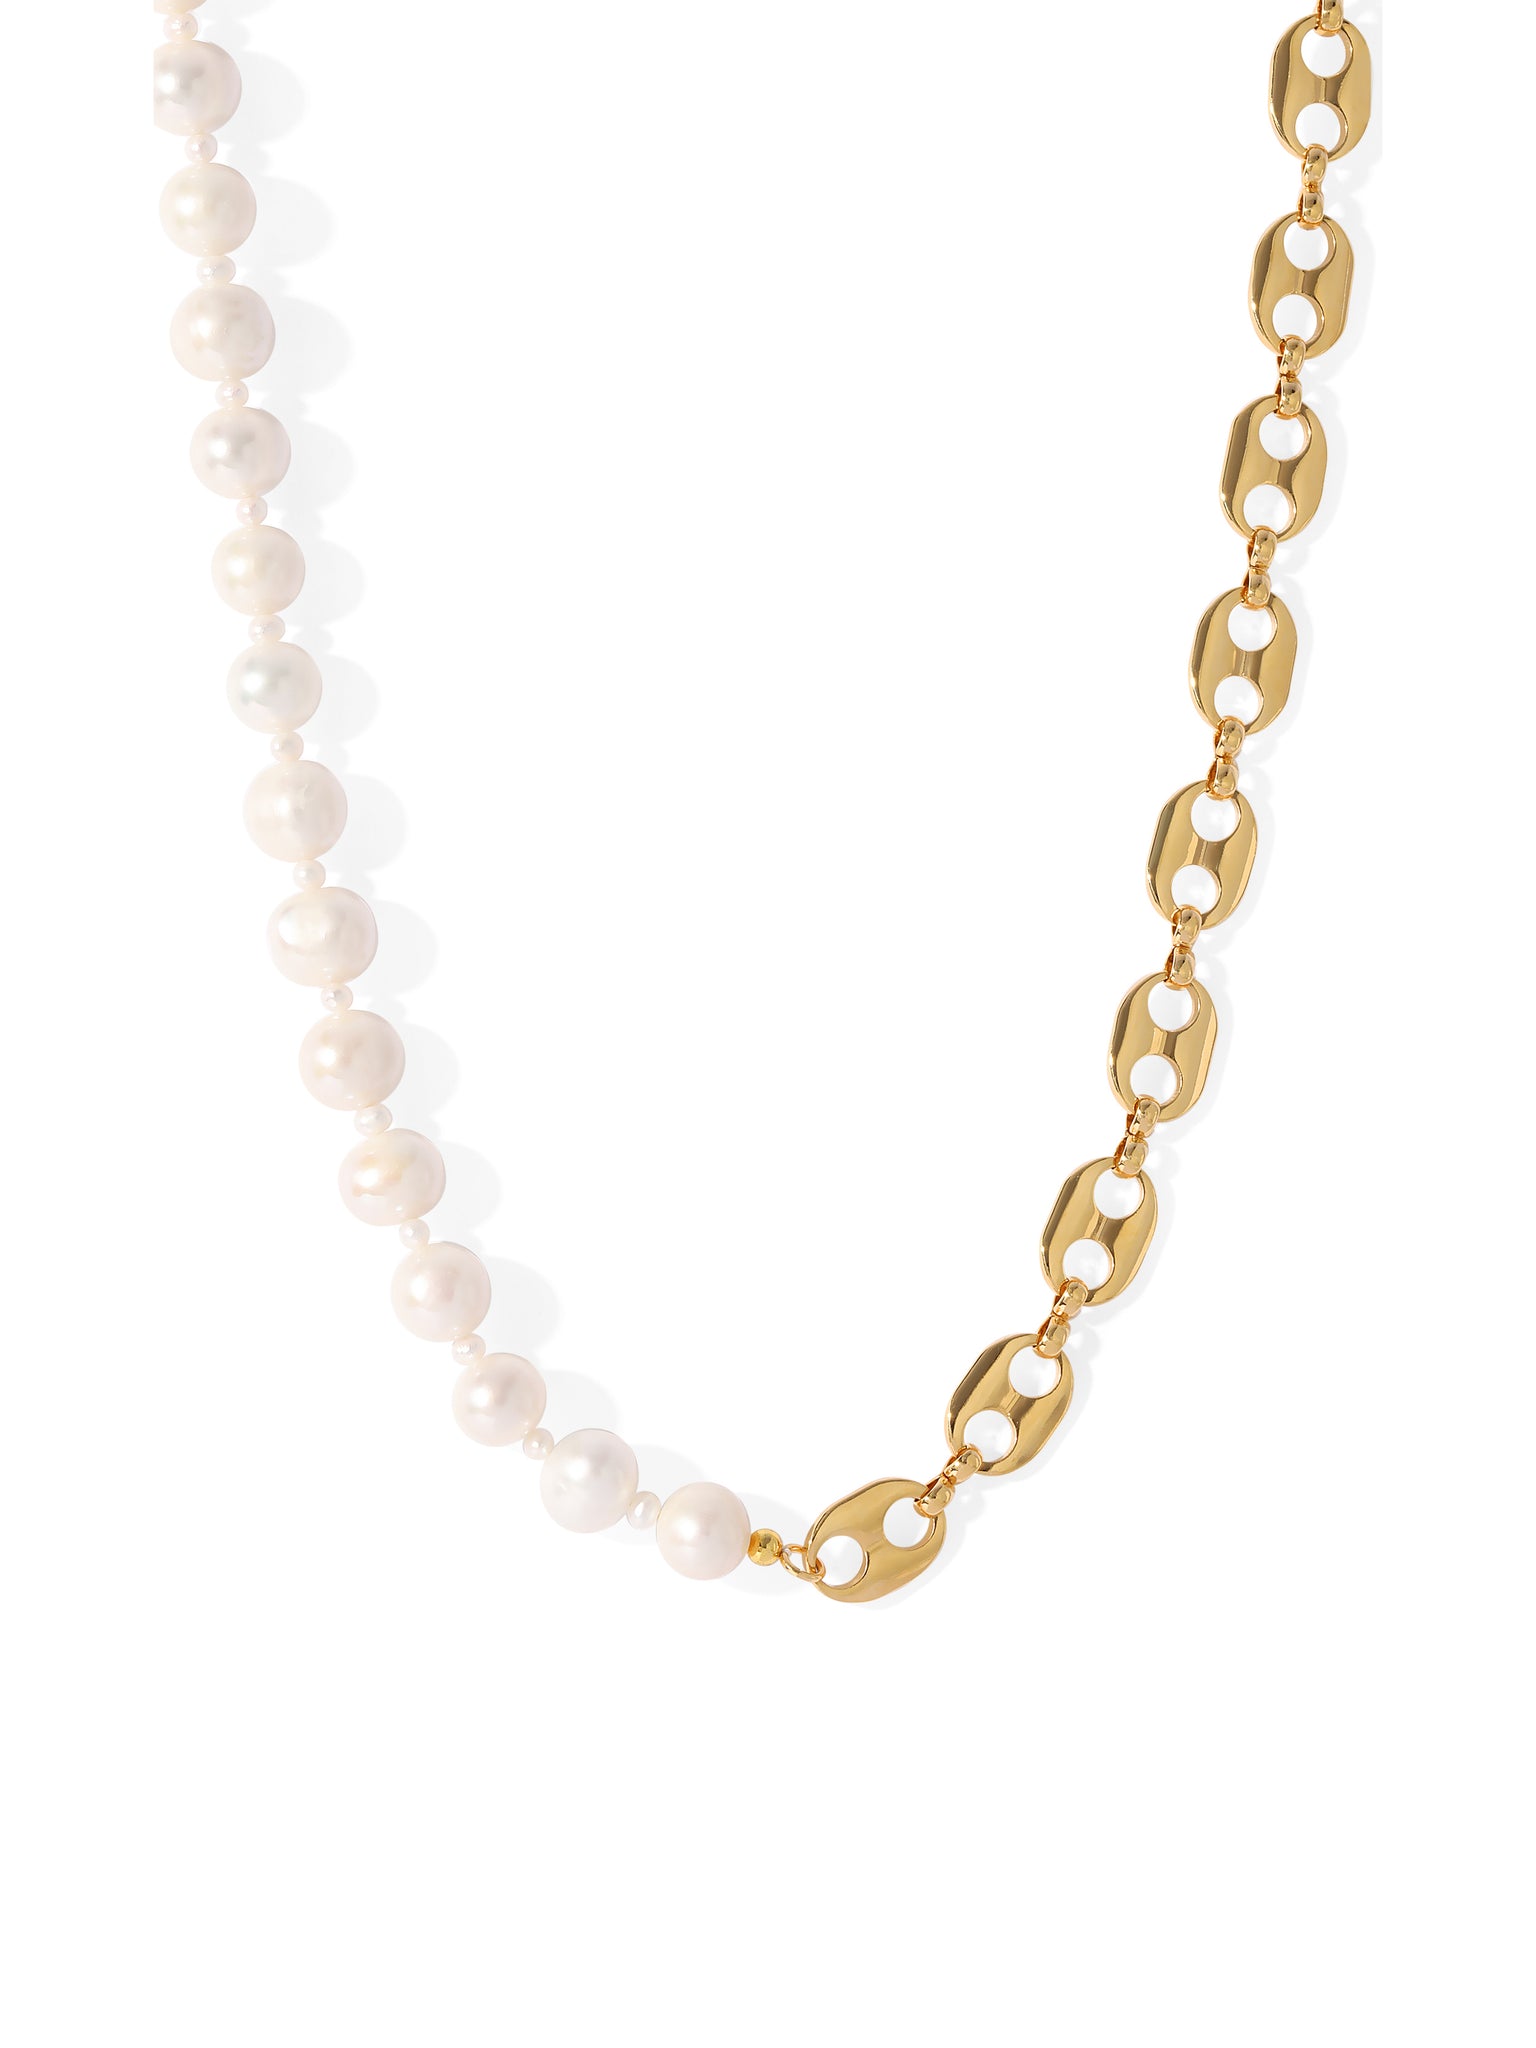 The Amara Pearl Necklace